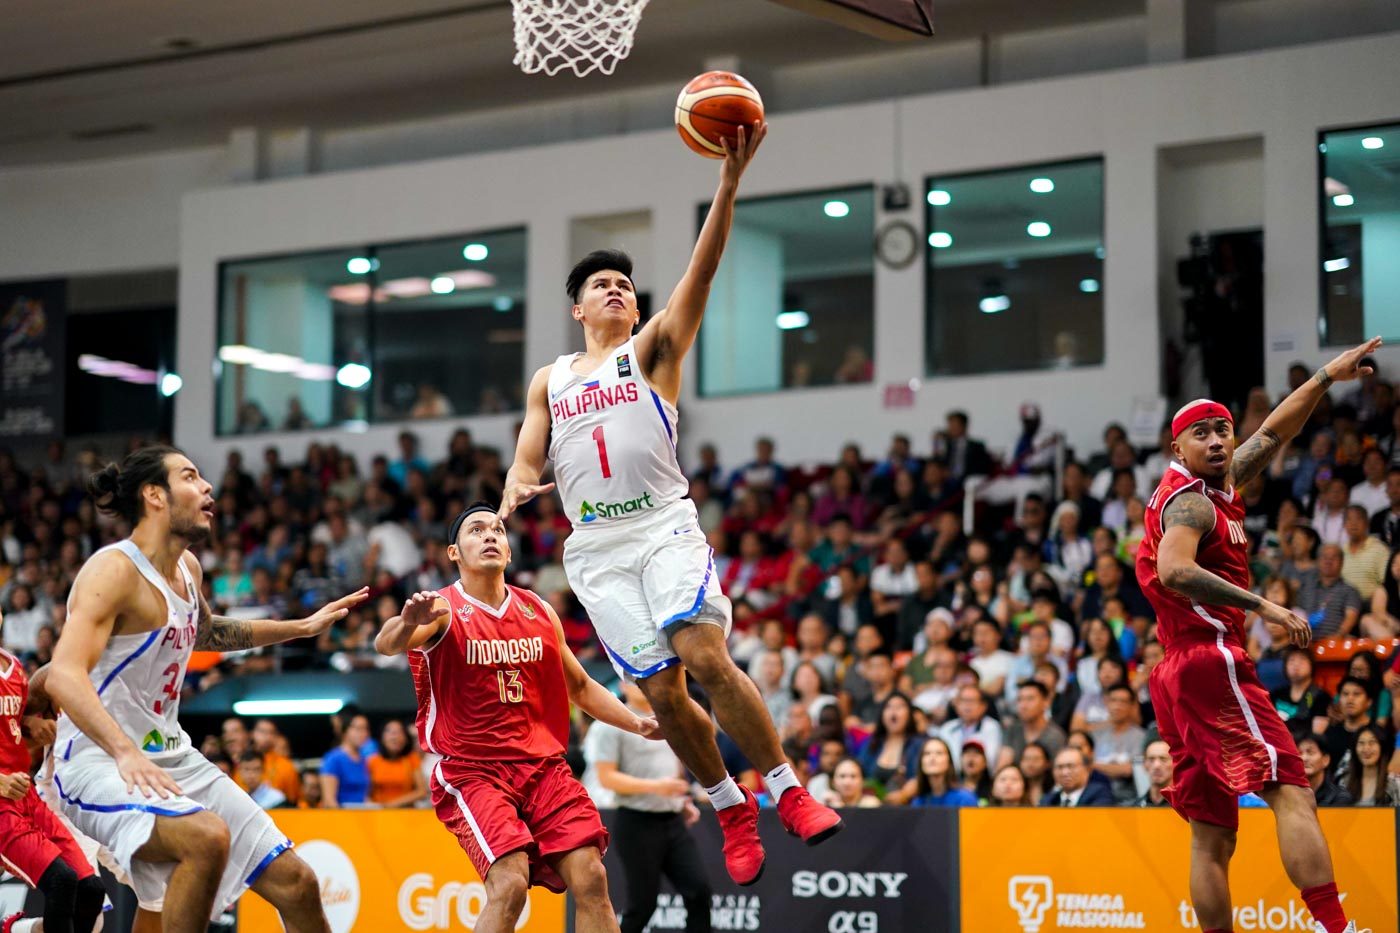 SEA GAMES 2019: SBP aims to sweep all basketball events